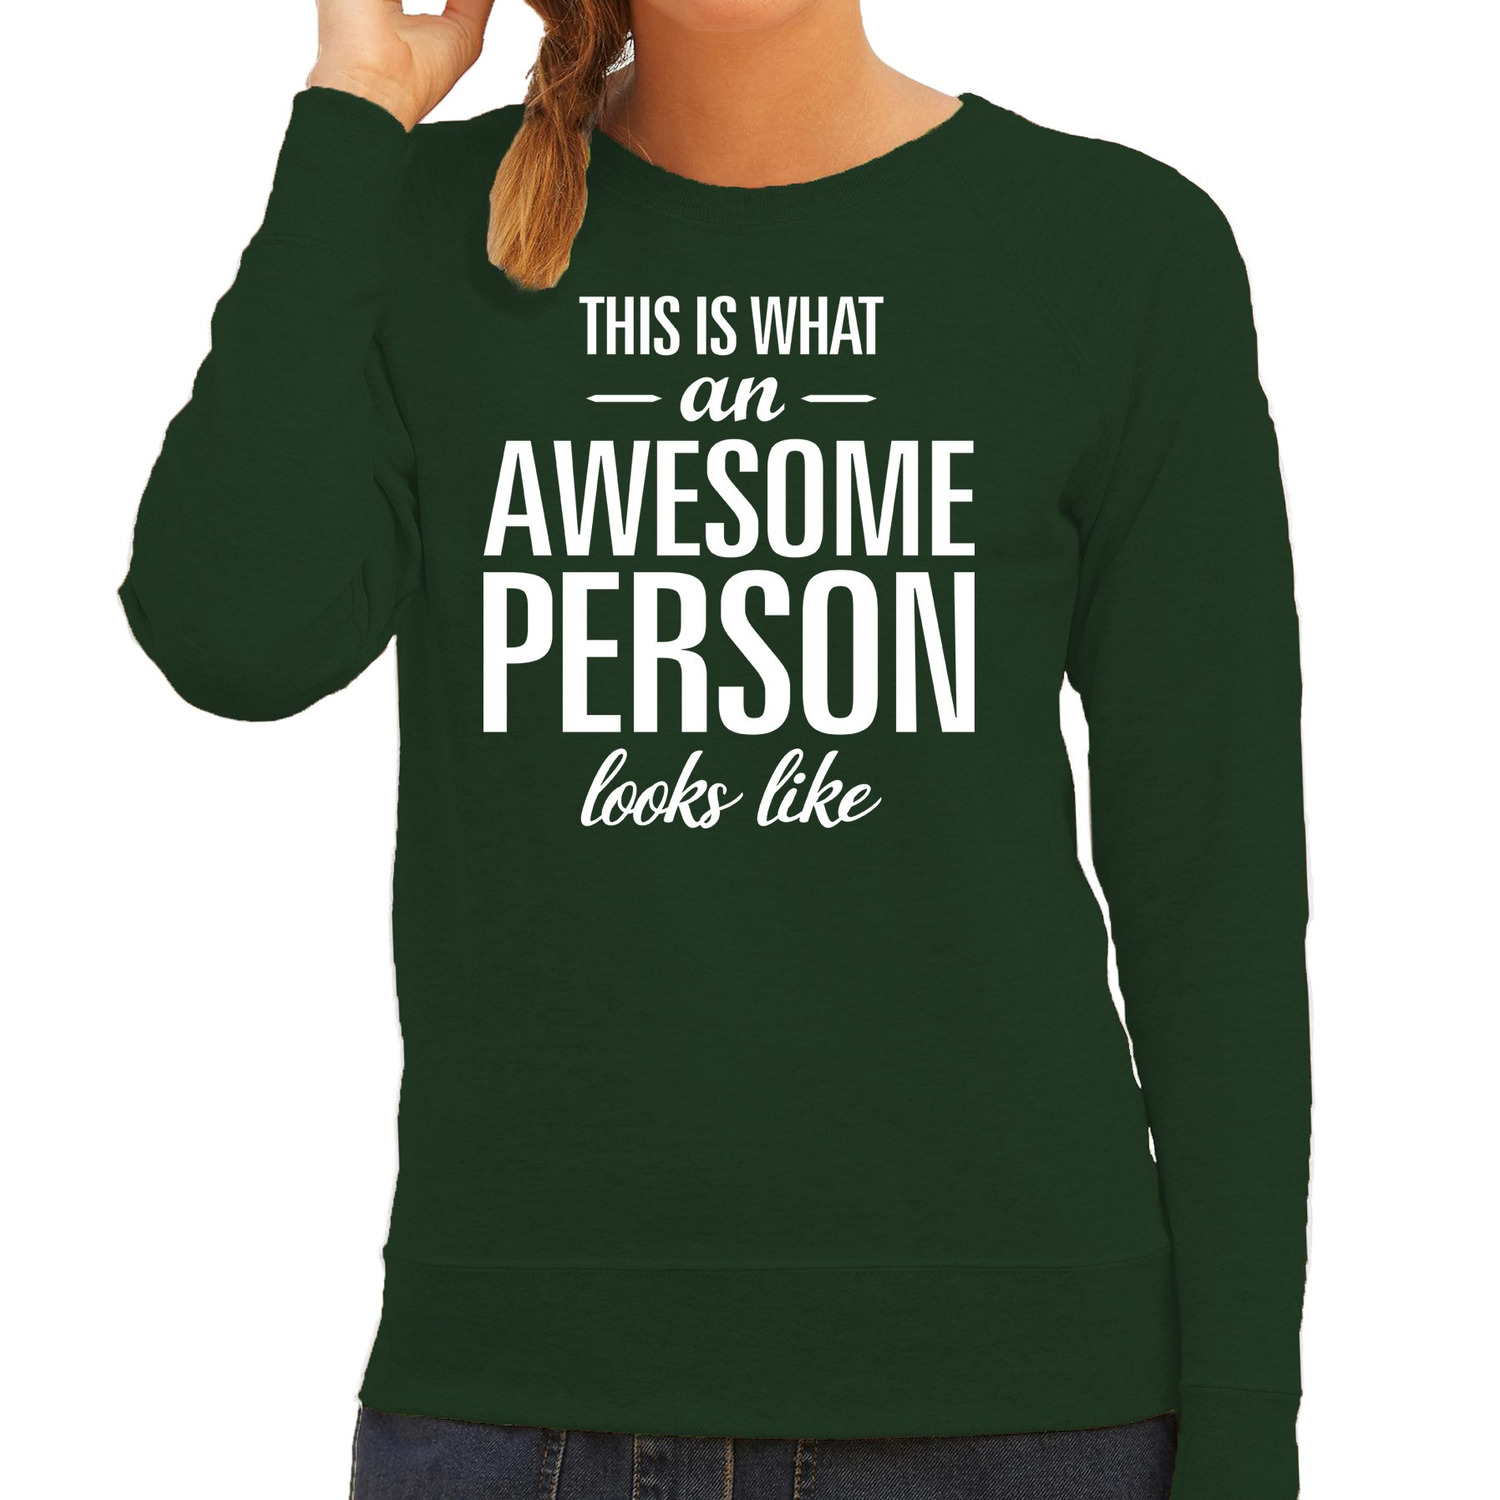 Awesome person / persoon cadeau trui groen dames